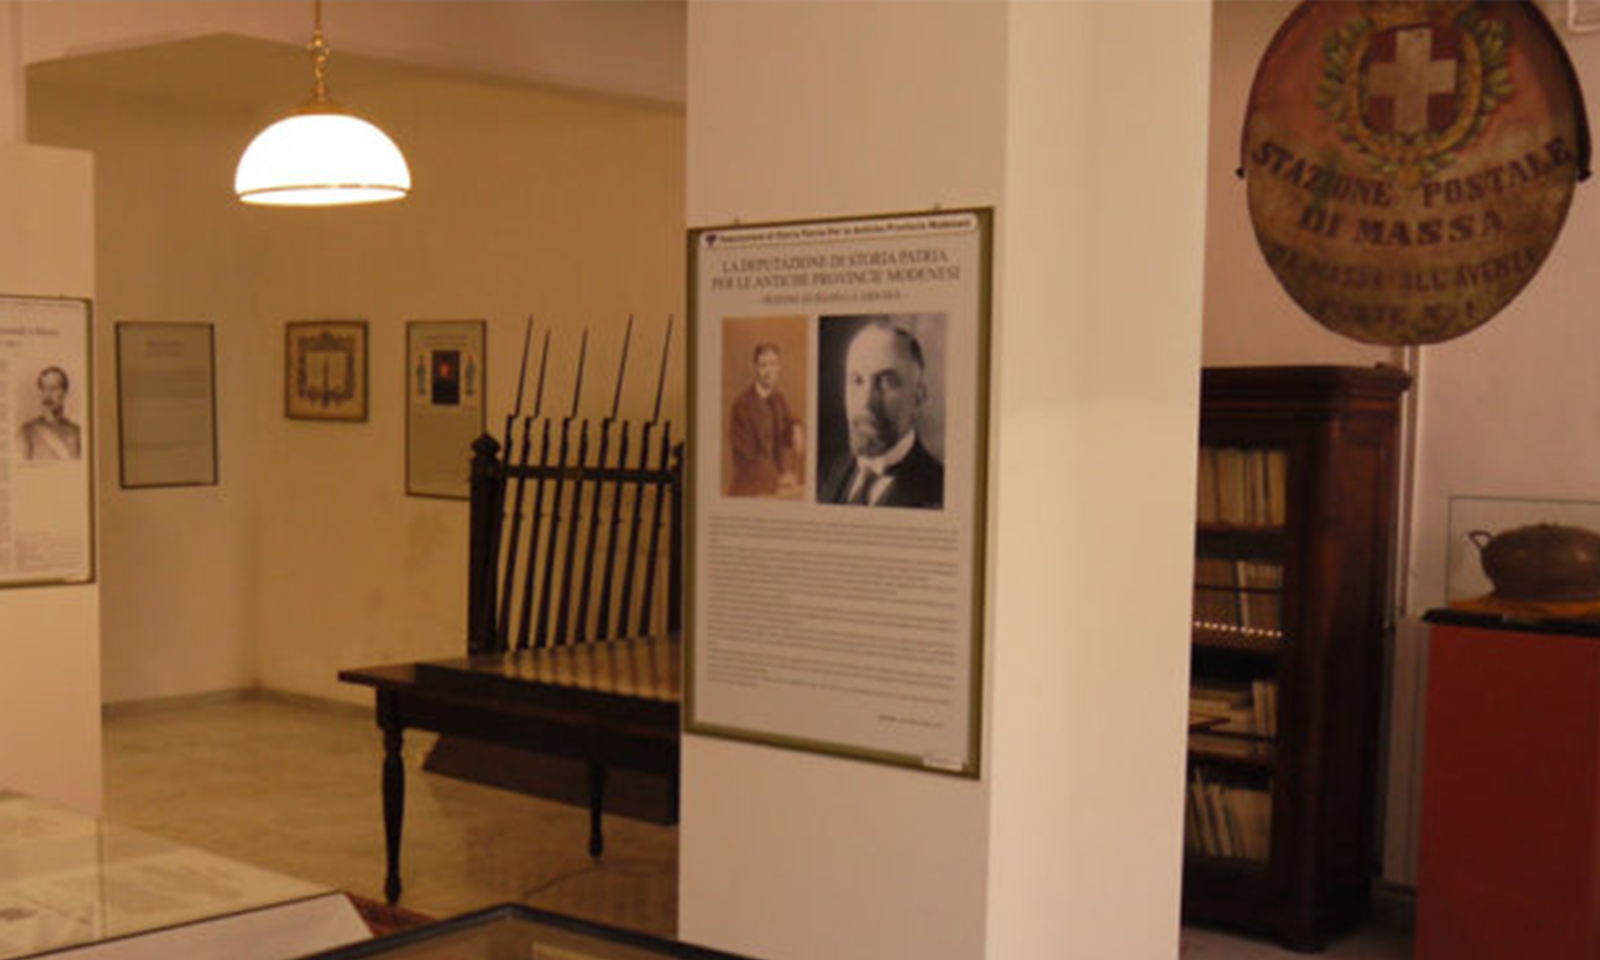 Historical Museum for the Promotion of Historical Studies on the Ancient Provinces in the Area of Modena